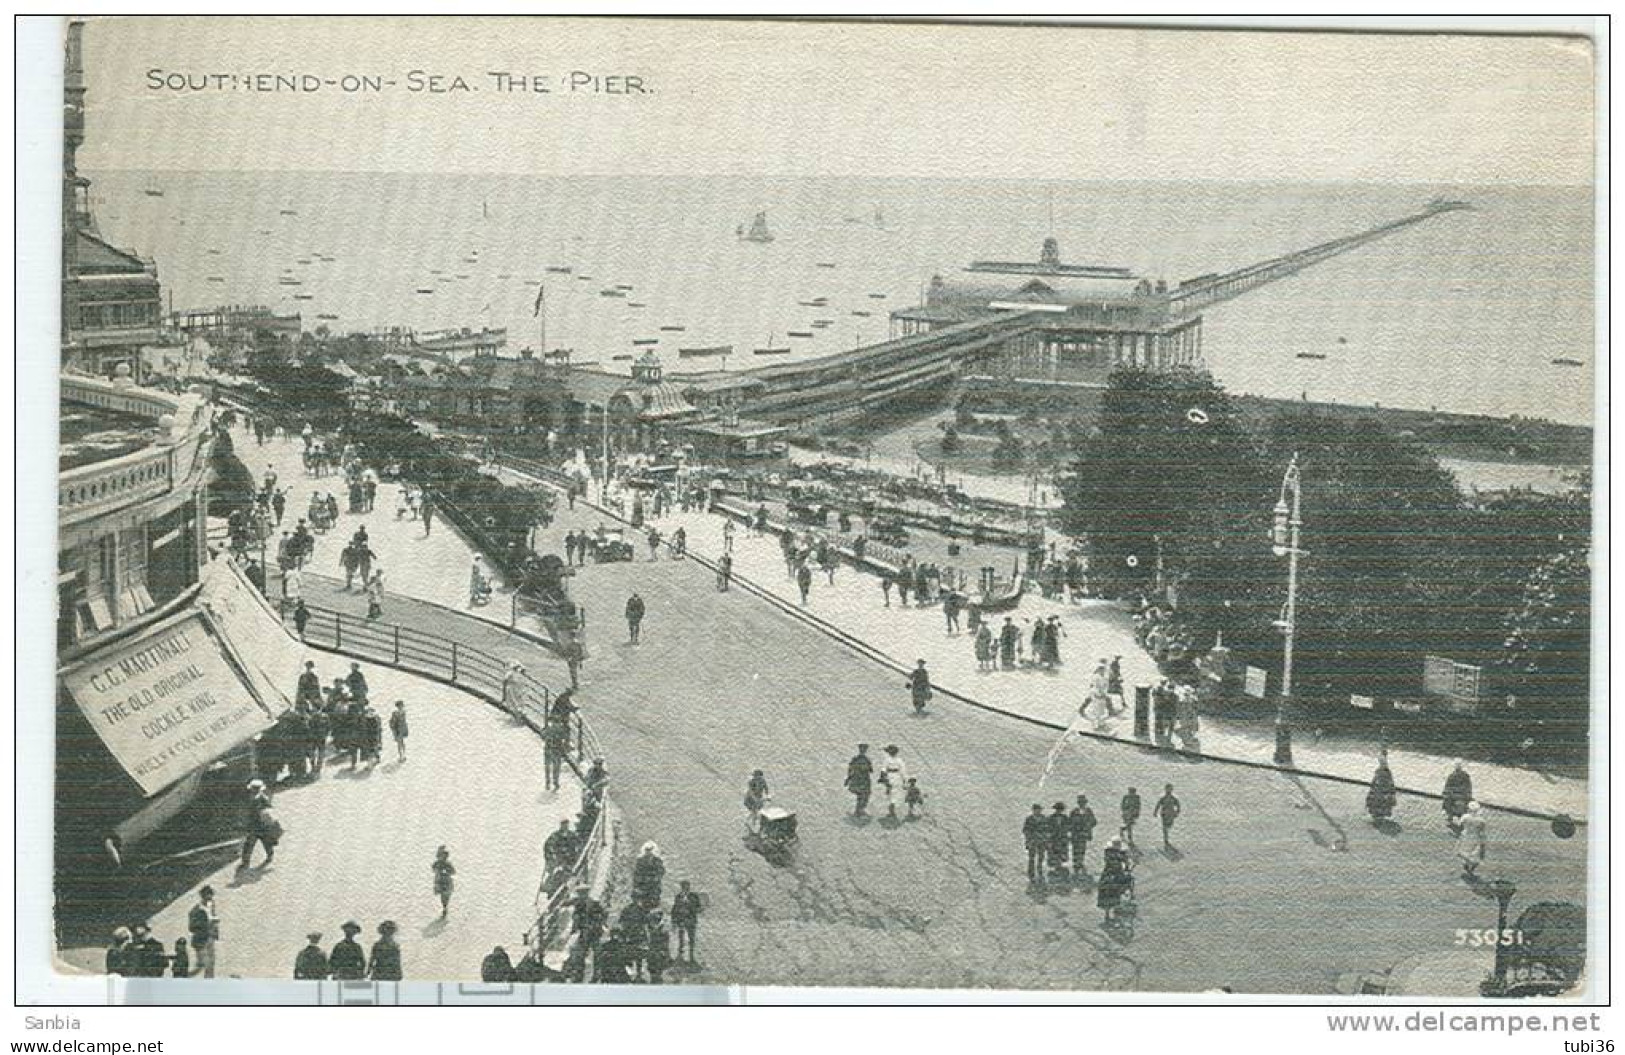 SOUTHEND ON SEA - THE PIER - POSTCARD, BLACK WHITE, NEW, ANIMATED, SMALL SIZE 9 X 14, - Southend, Westcliff & Leigh